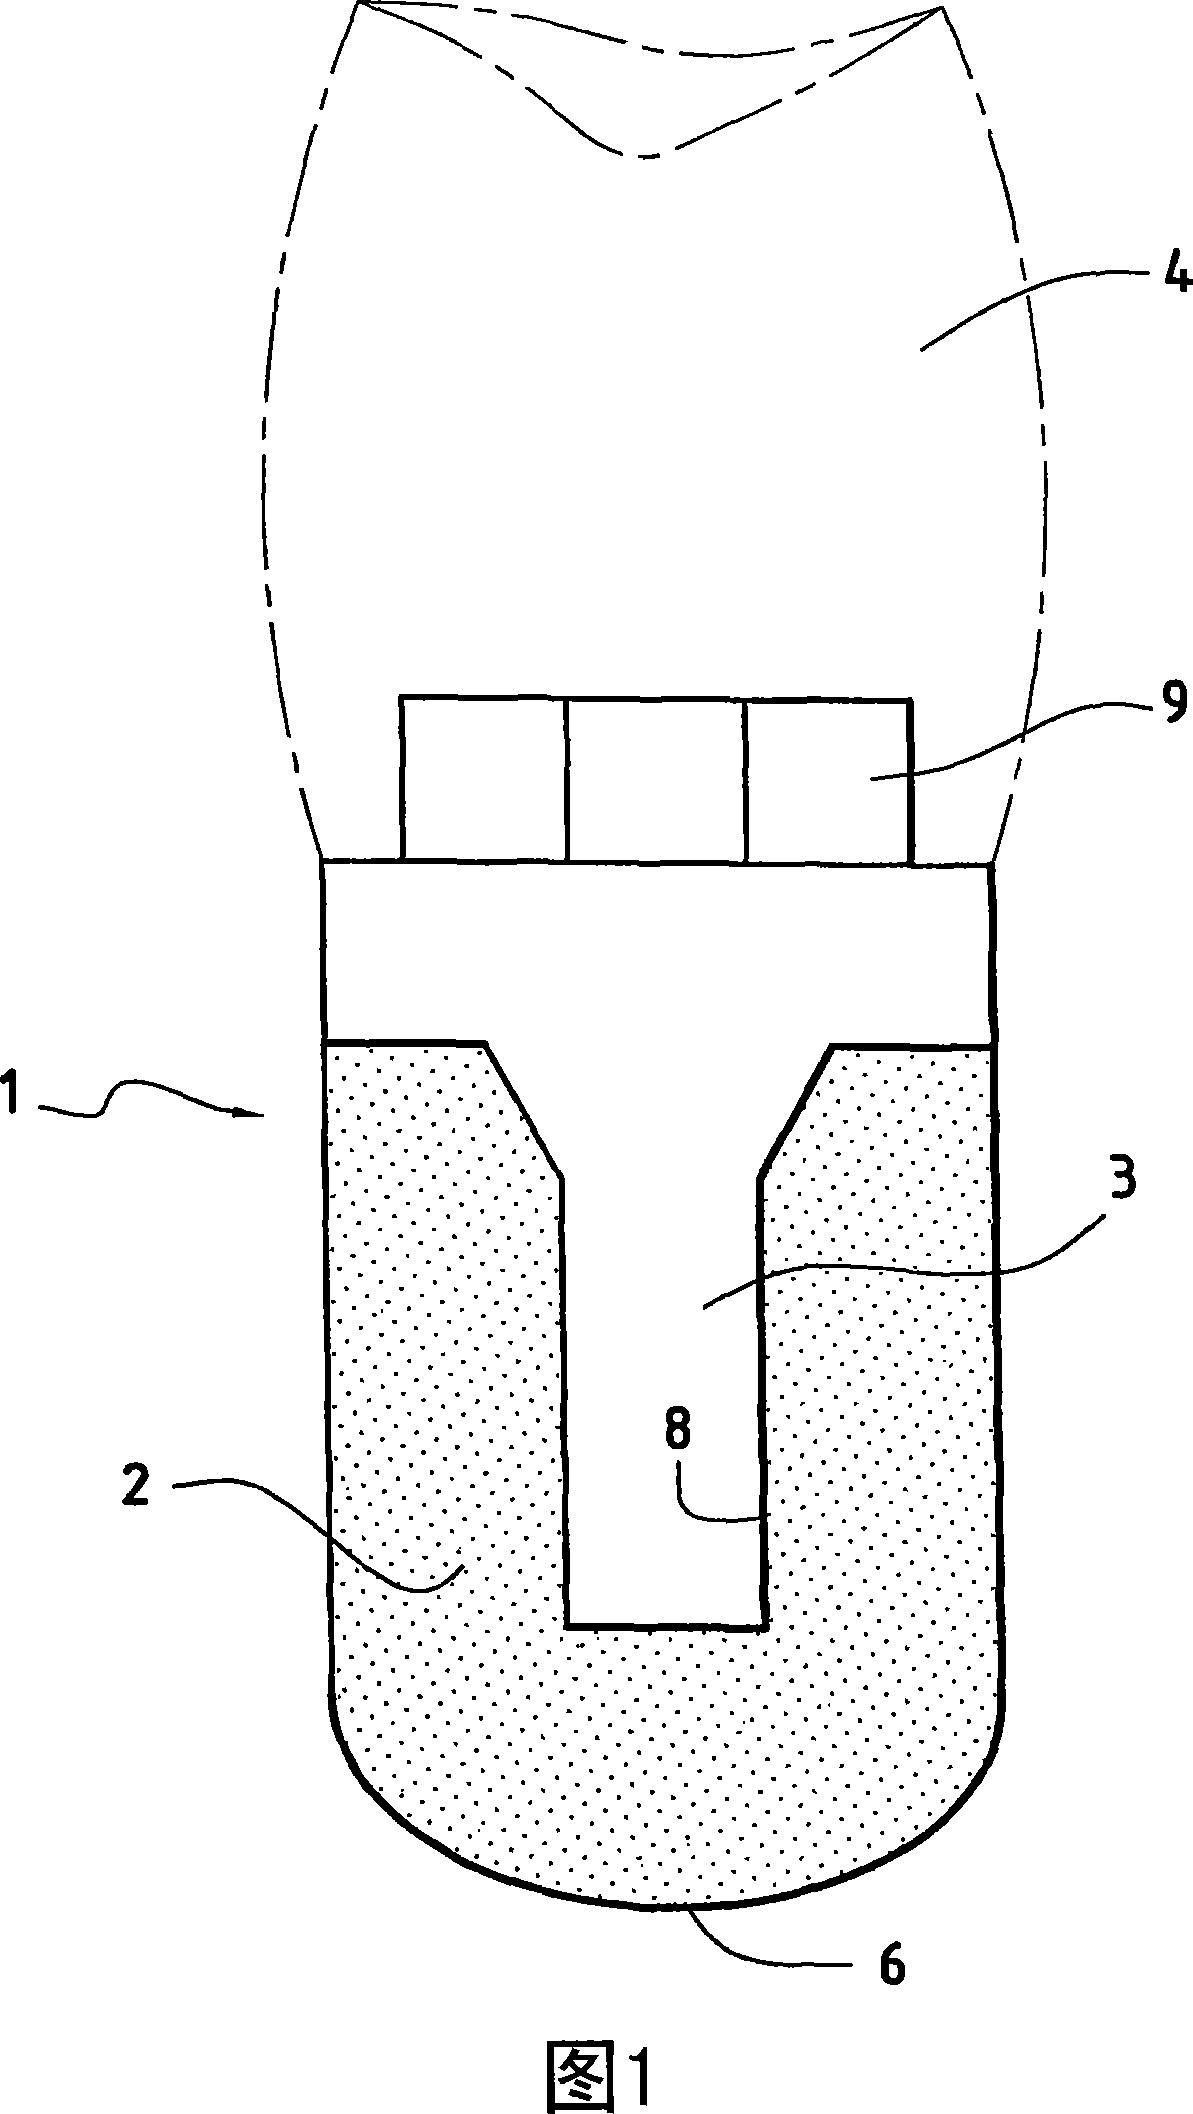 Dental implant comprising a porous trabecular structure